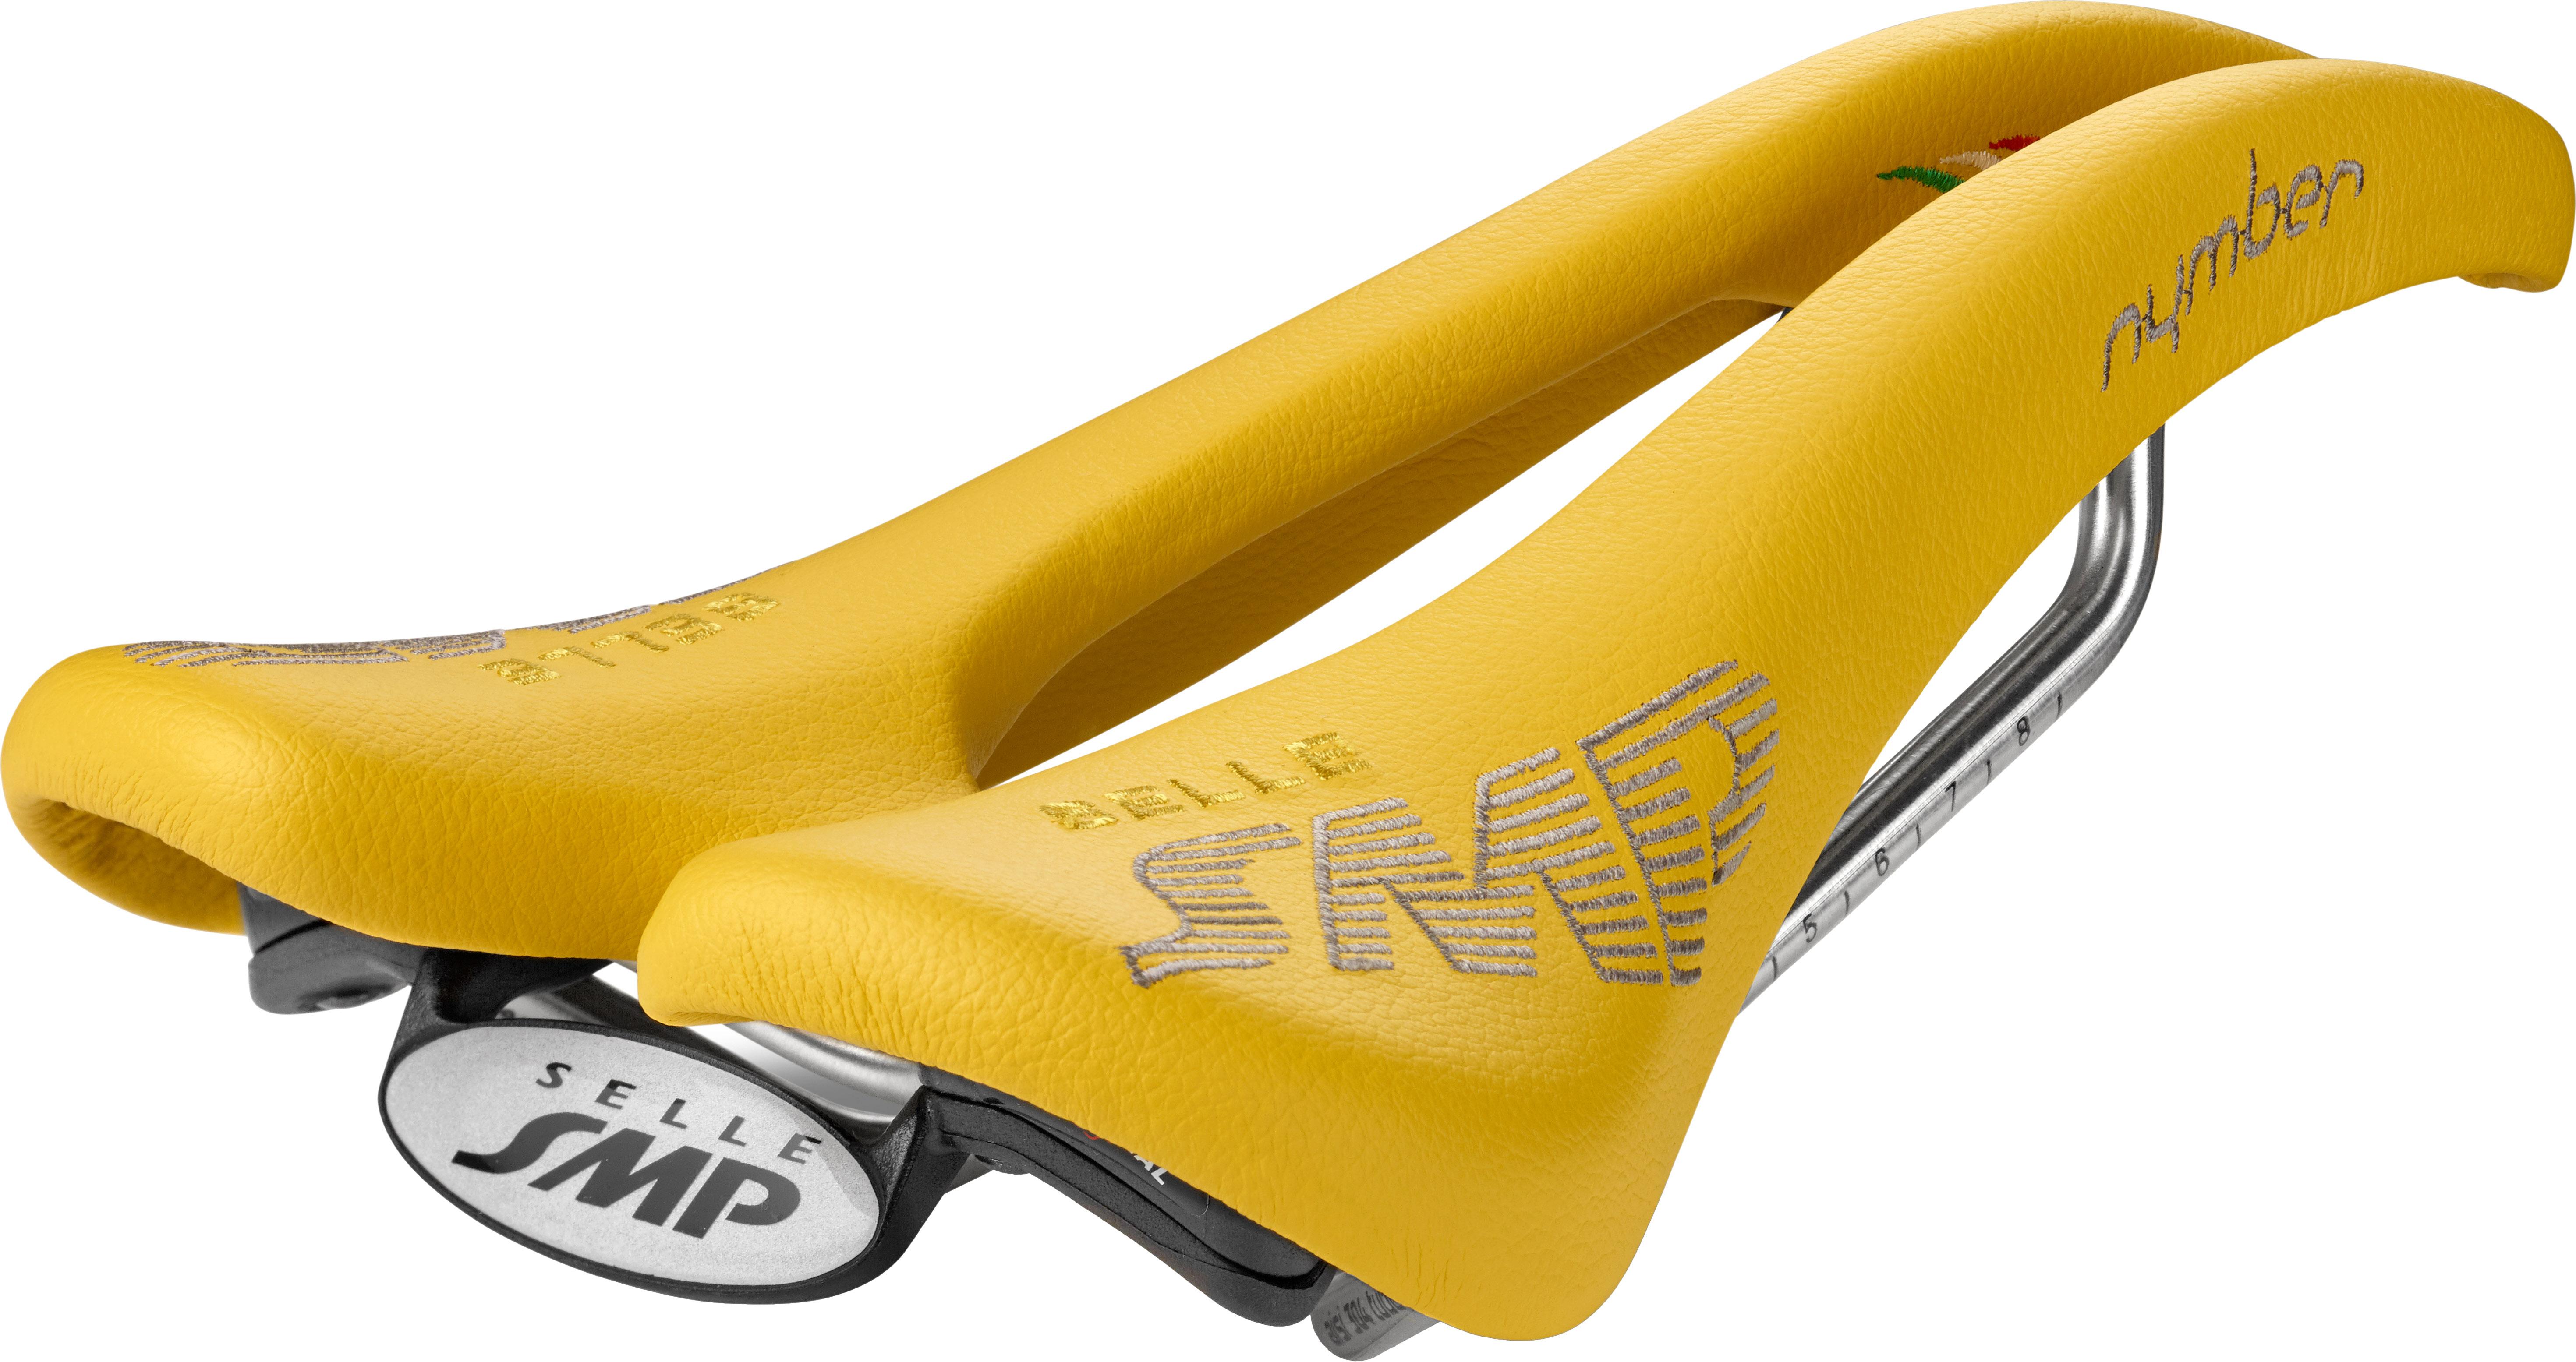 Selle Smp Nymber Saddle - Yellow